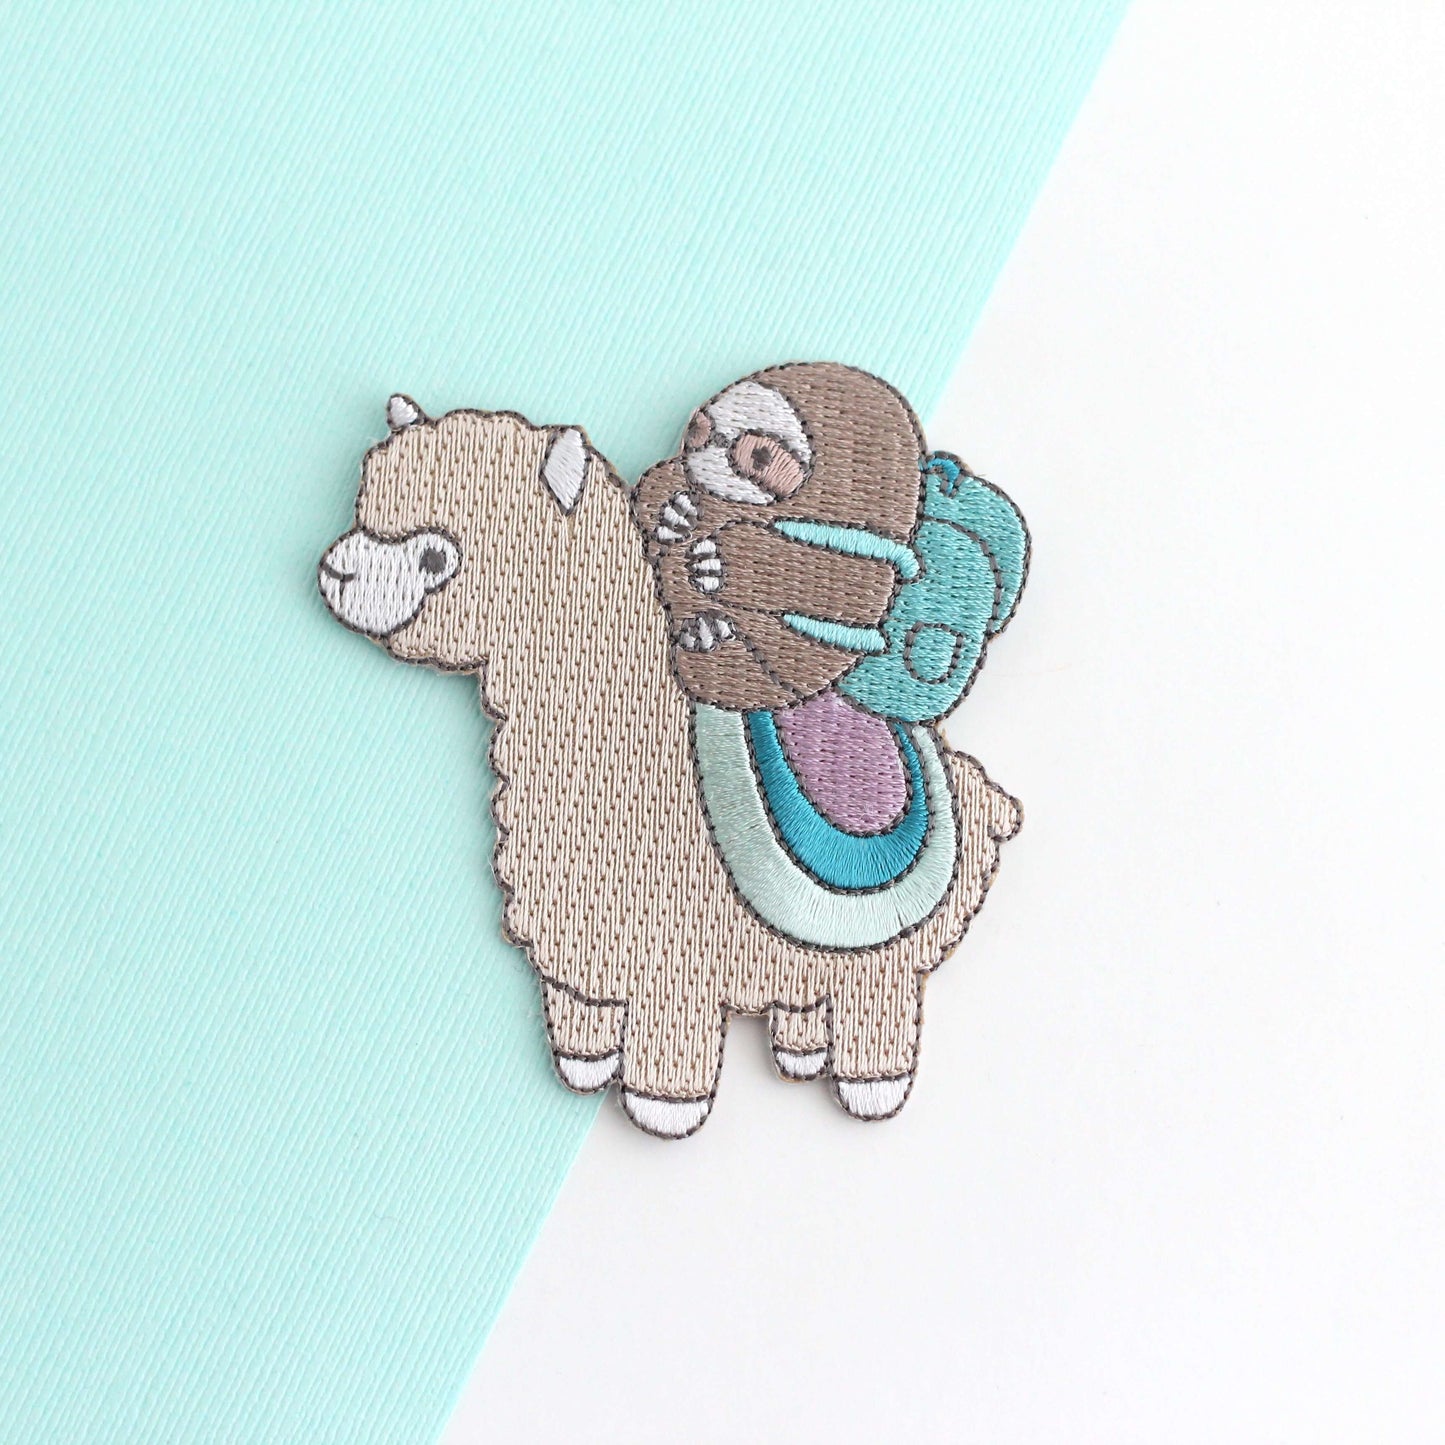 Sloth and Alpaca Adventurer Embroidered Iron-On Patch - Llama Patch by Wild Whimsy Woolies